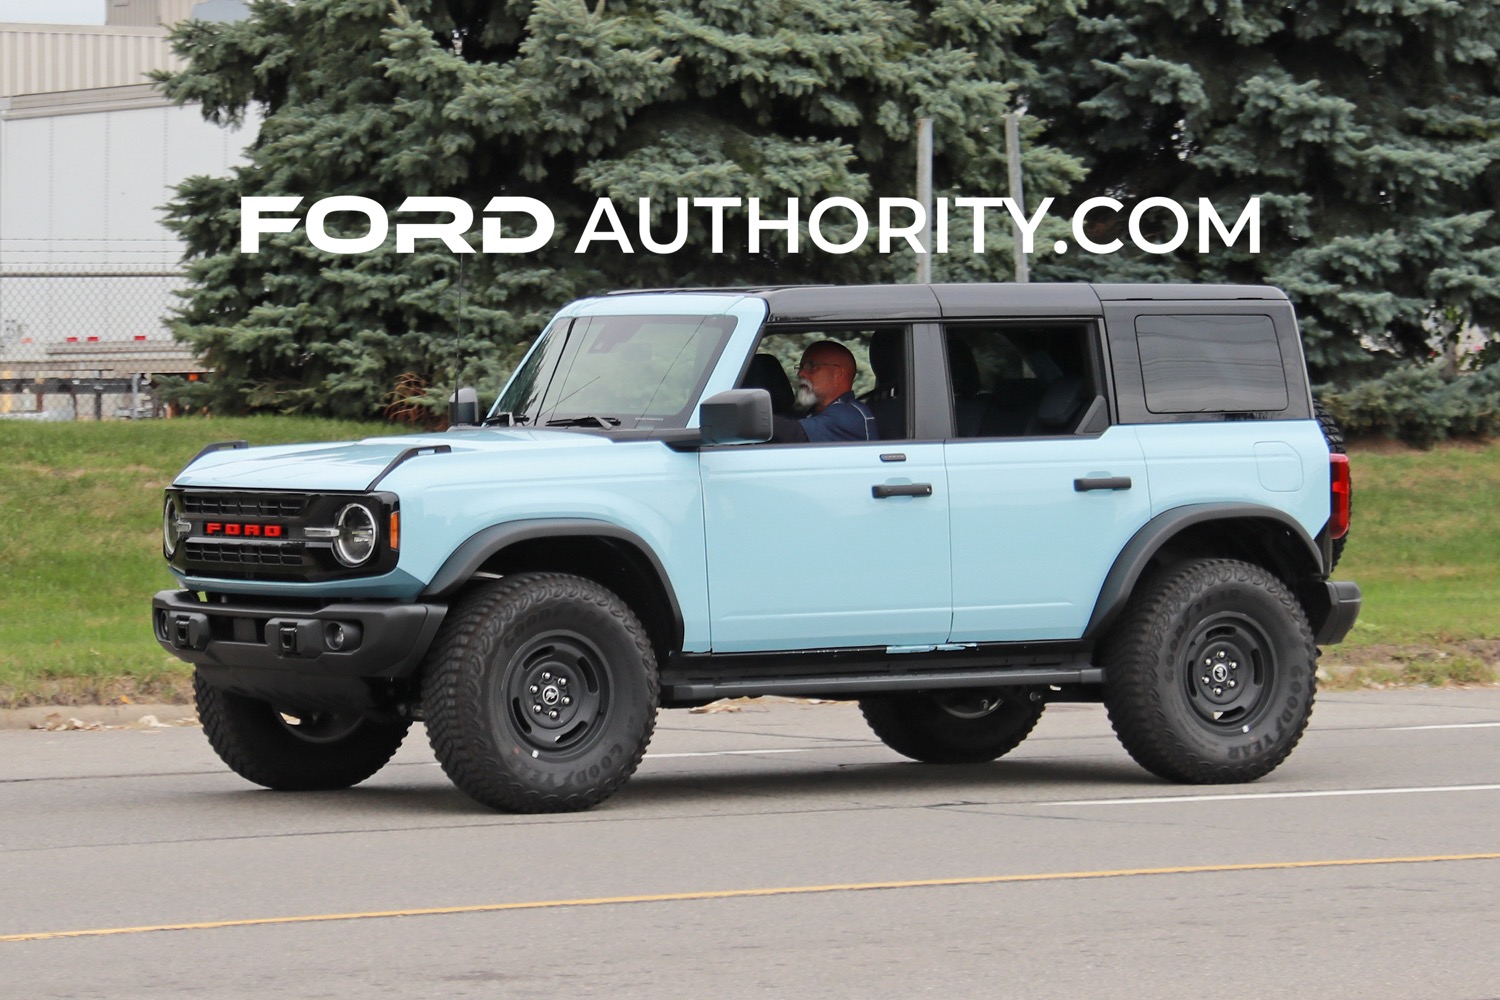 Ford Bronco Robin's Egg Blue + Black Grill + Black Painted MOD Top Bronco Heritage Spotted 2023-Ford-Bronco-Prototype-Spy-Shots-Robins-Egg-Blue-Potential-Heritage-Edition-with-Black-Acc